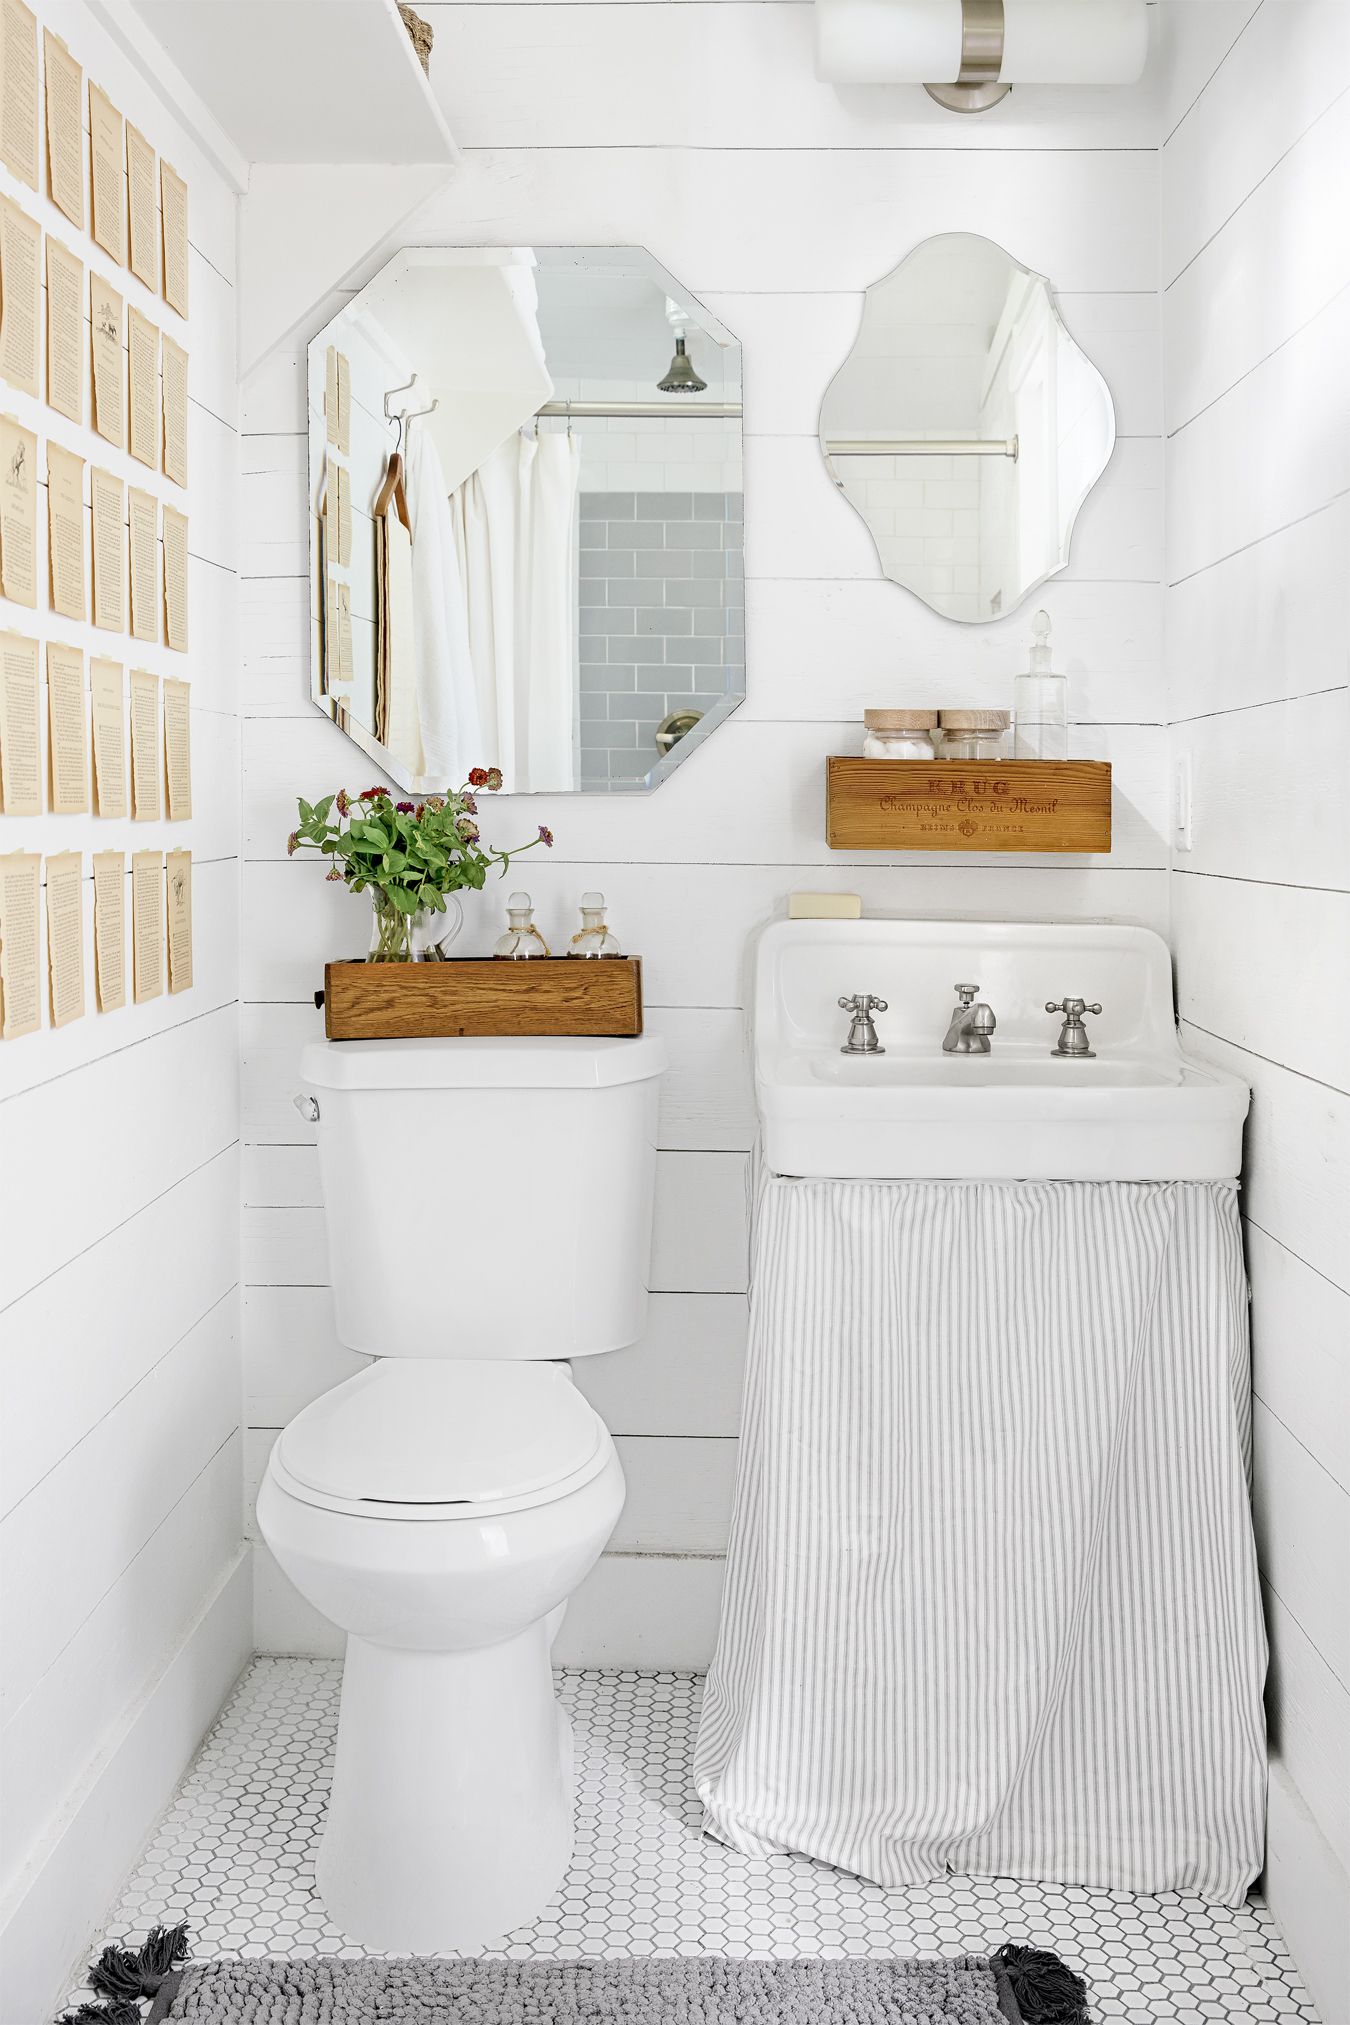 22 White Bathroom Ideas That Will Leave You Enthralled